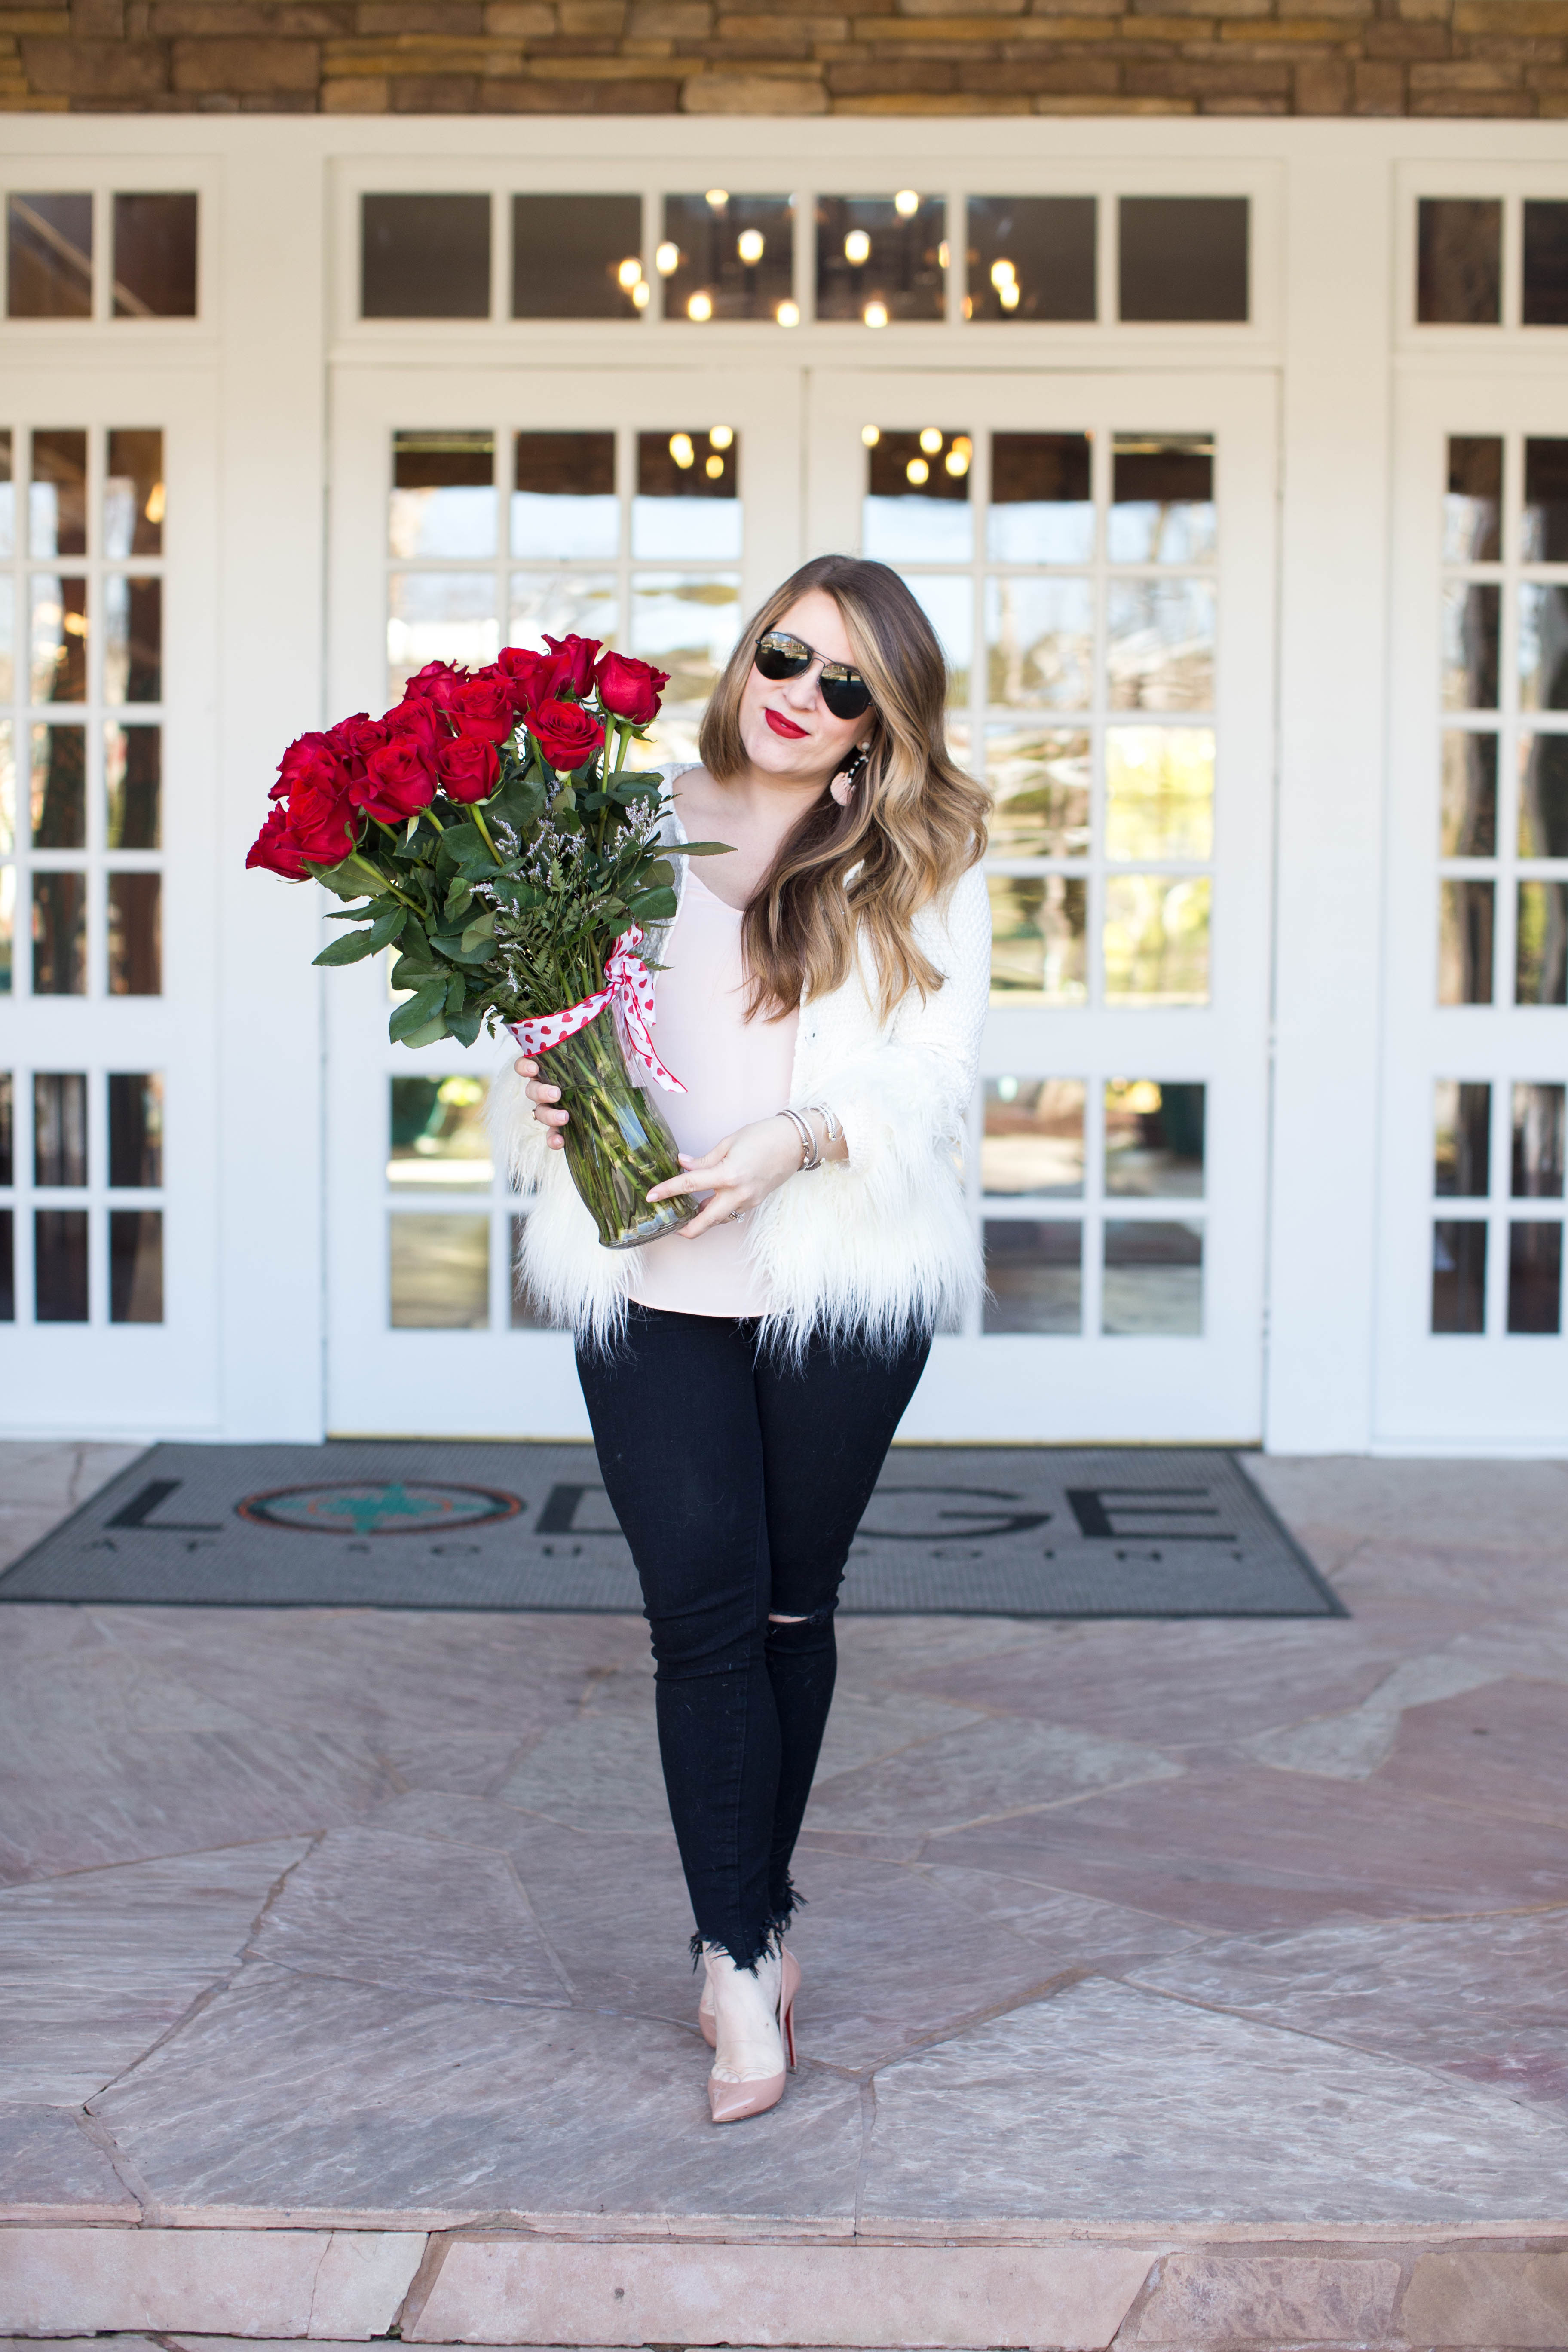 Valentines Day Flowers by popular North Carolina lifestyle blogger Coffee Beans and Bobby Pins